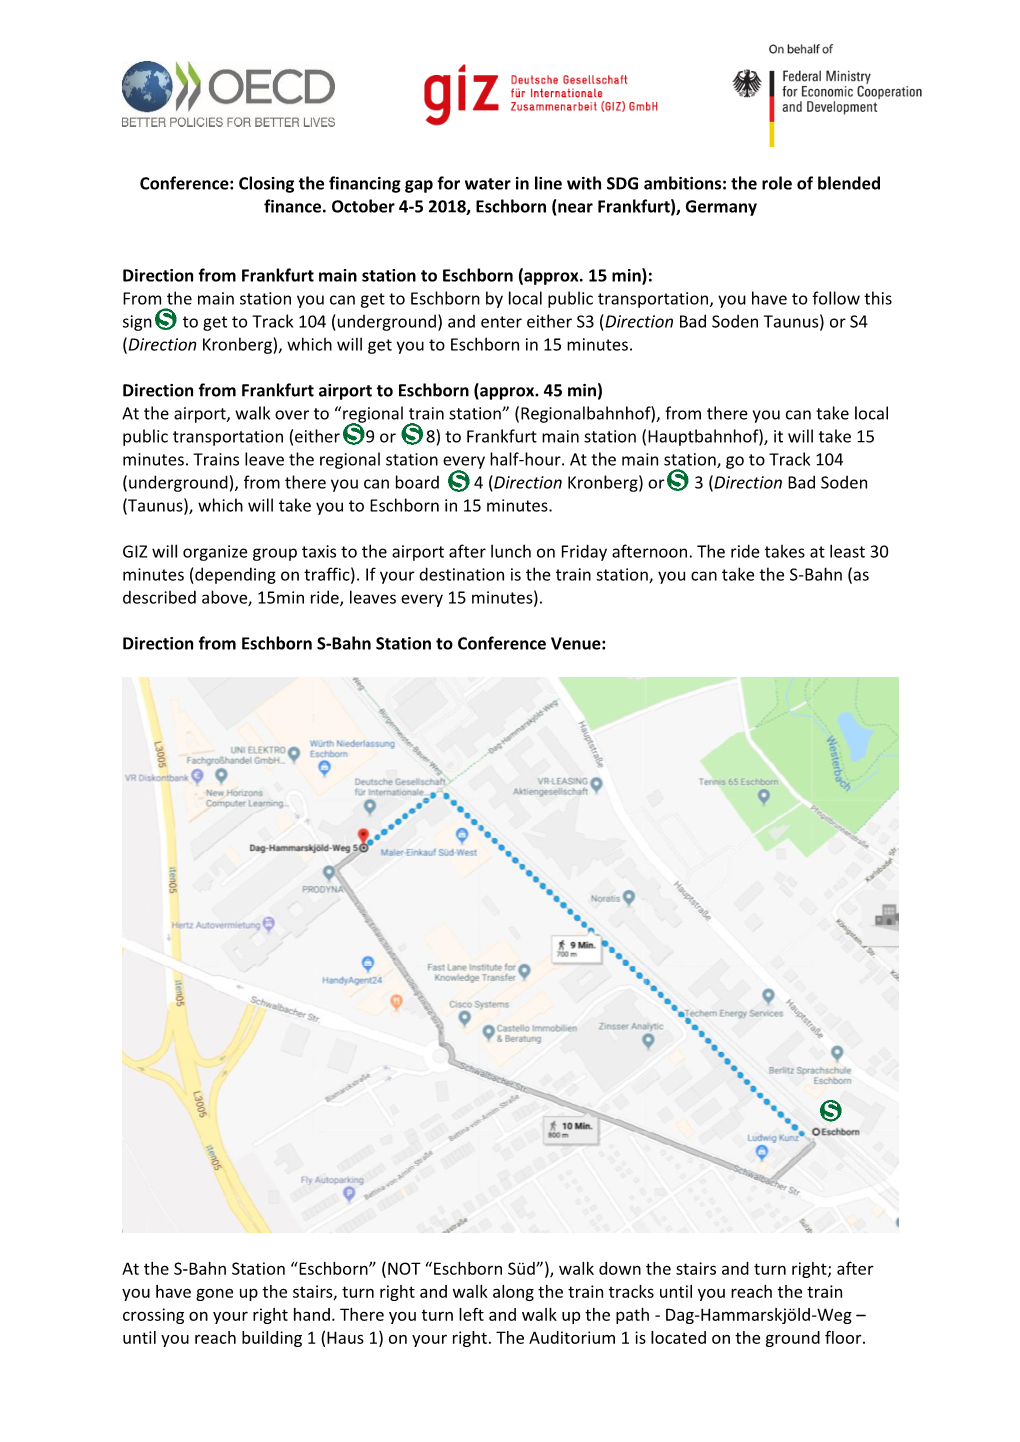 Logistical Note: Directions to Conference Venue